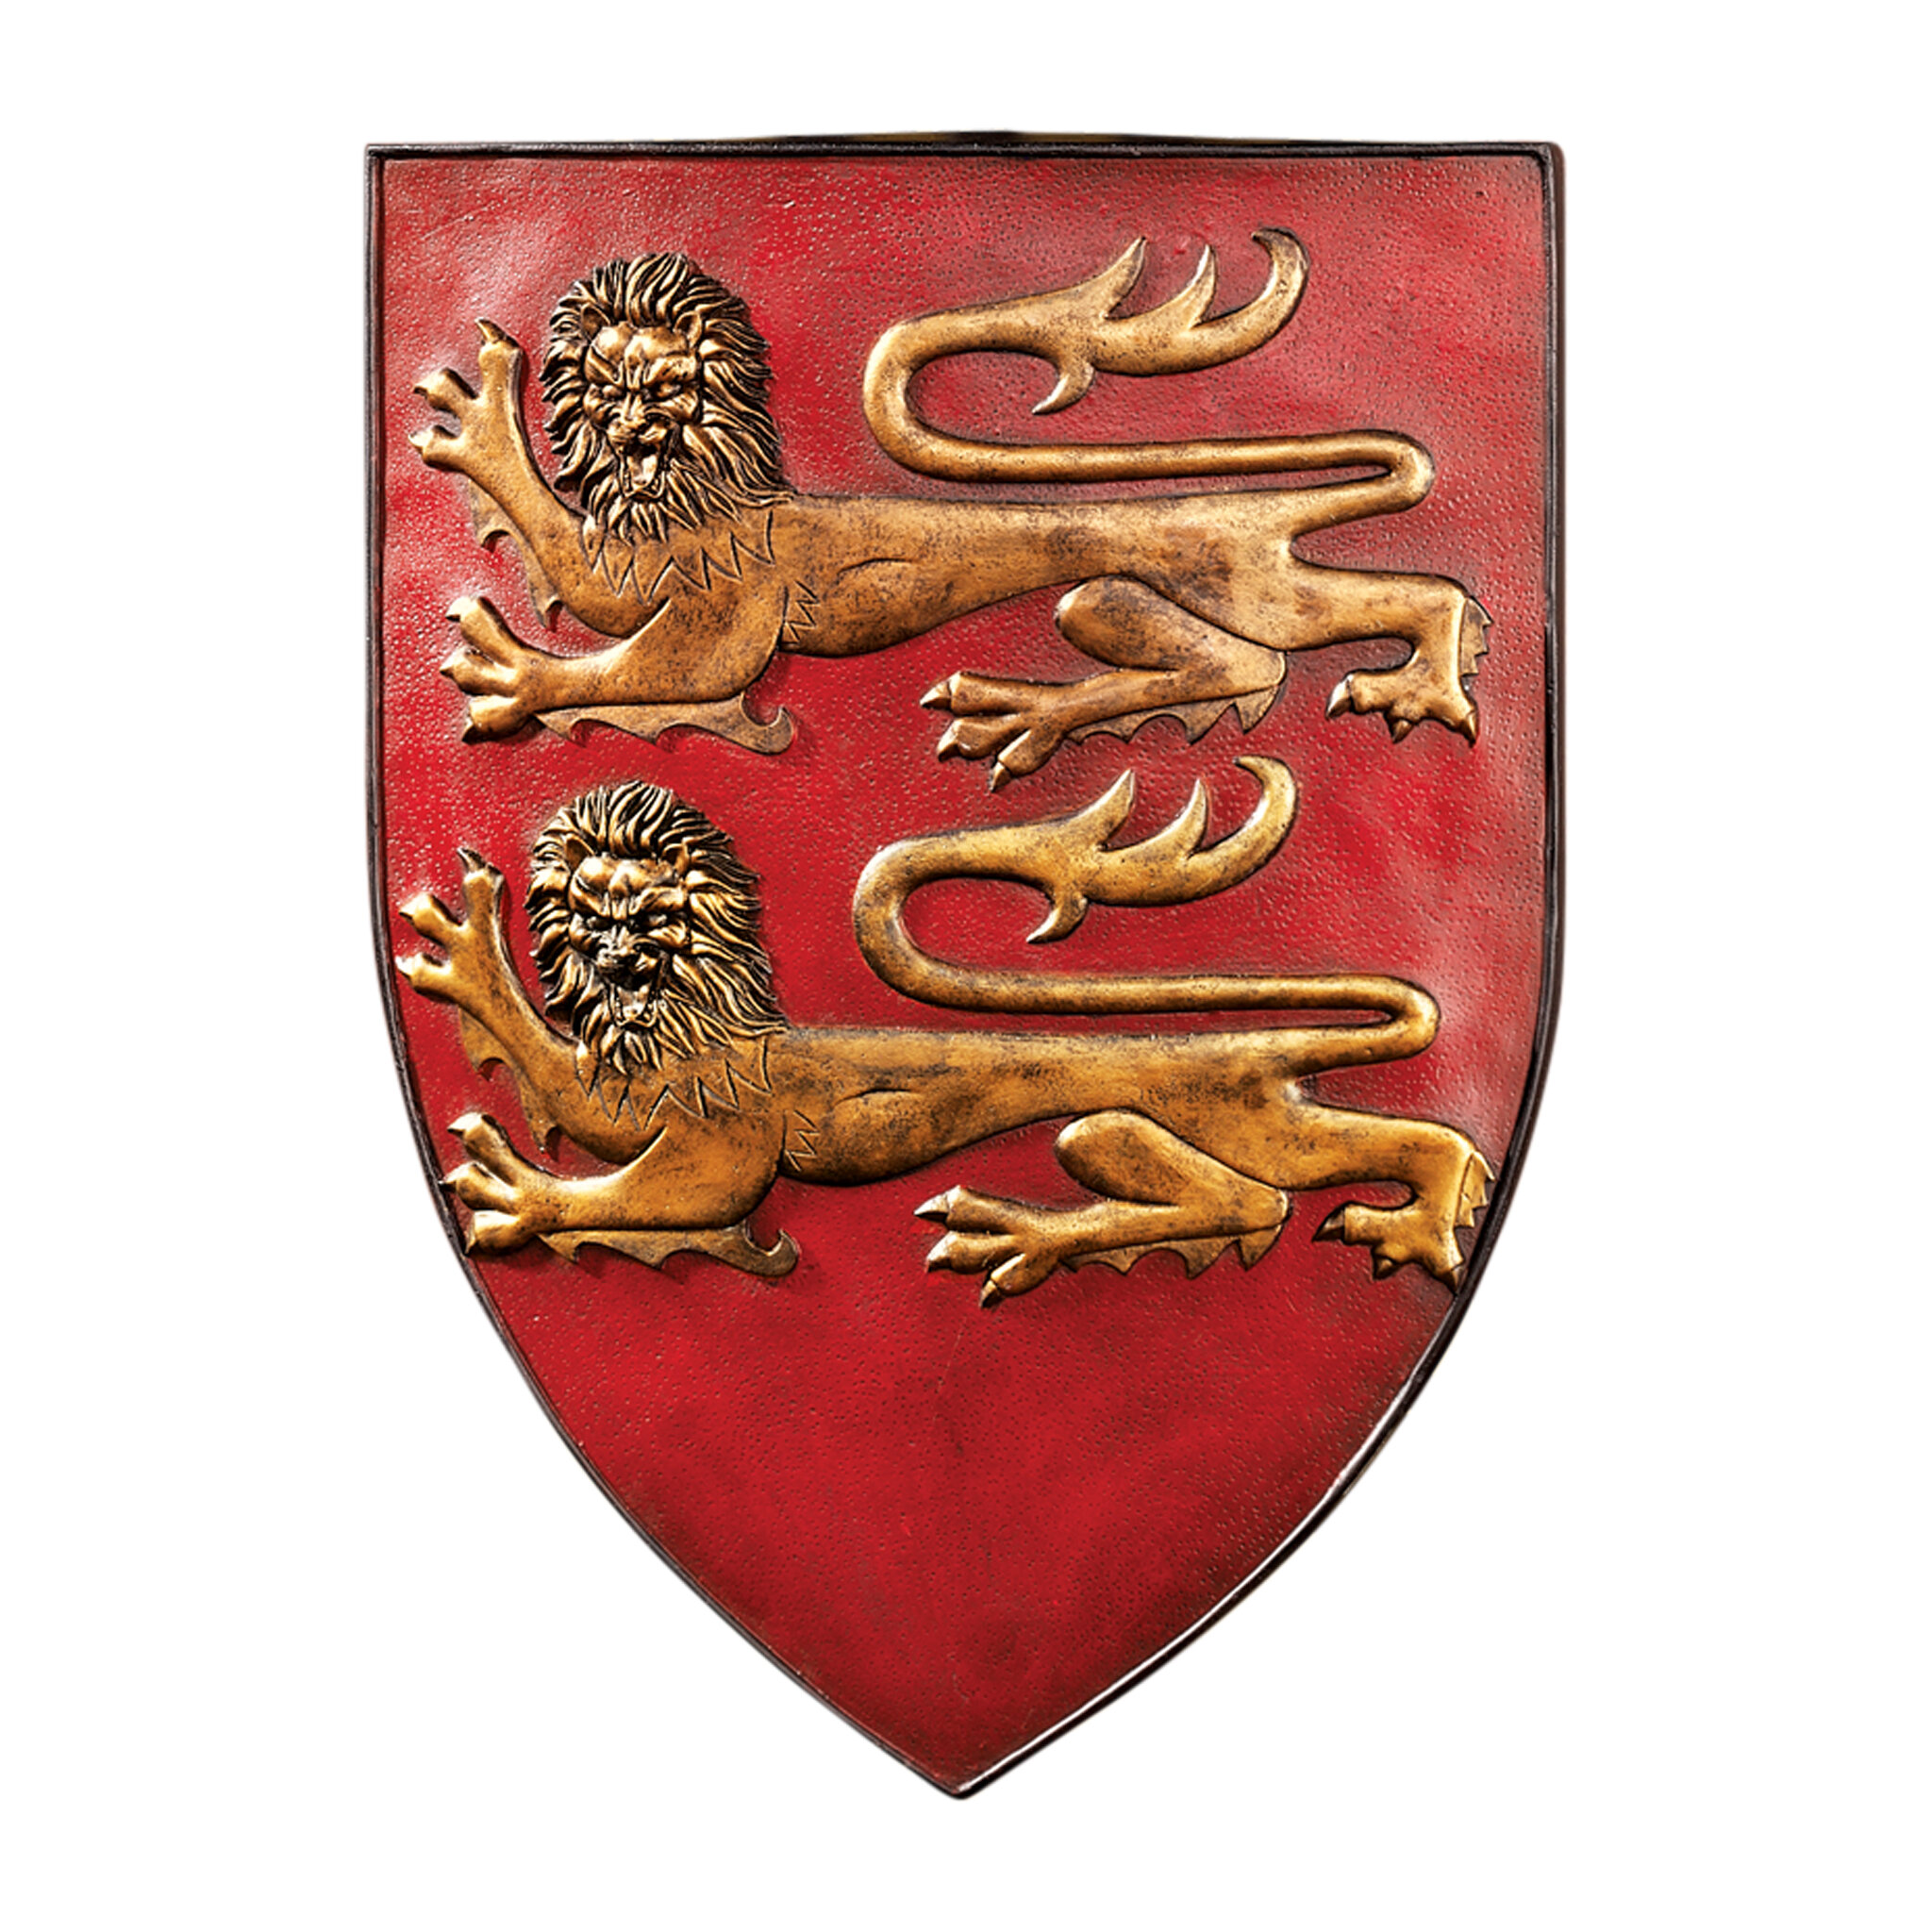 Design Toscano Grand Arms of France William of Normandy Shield